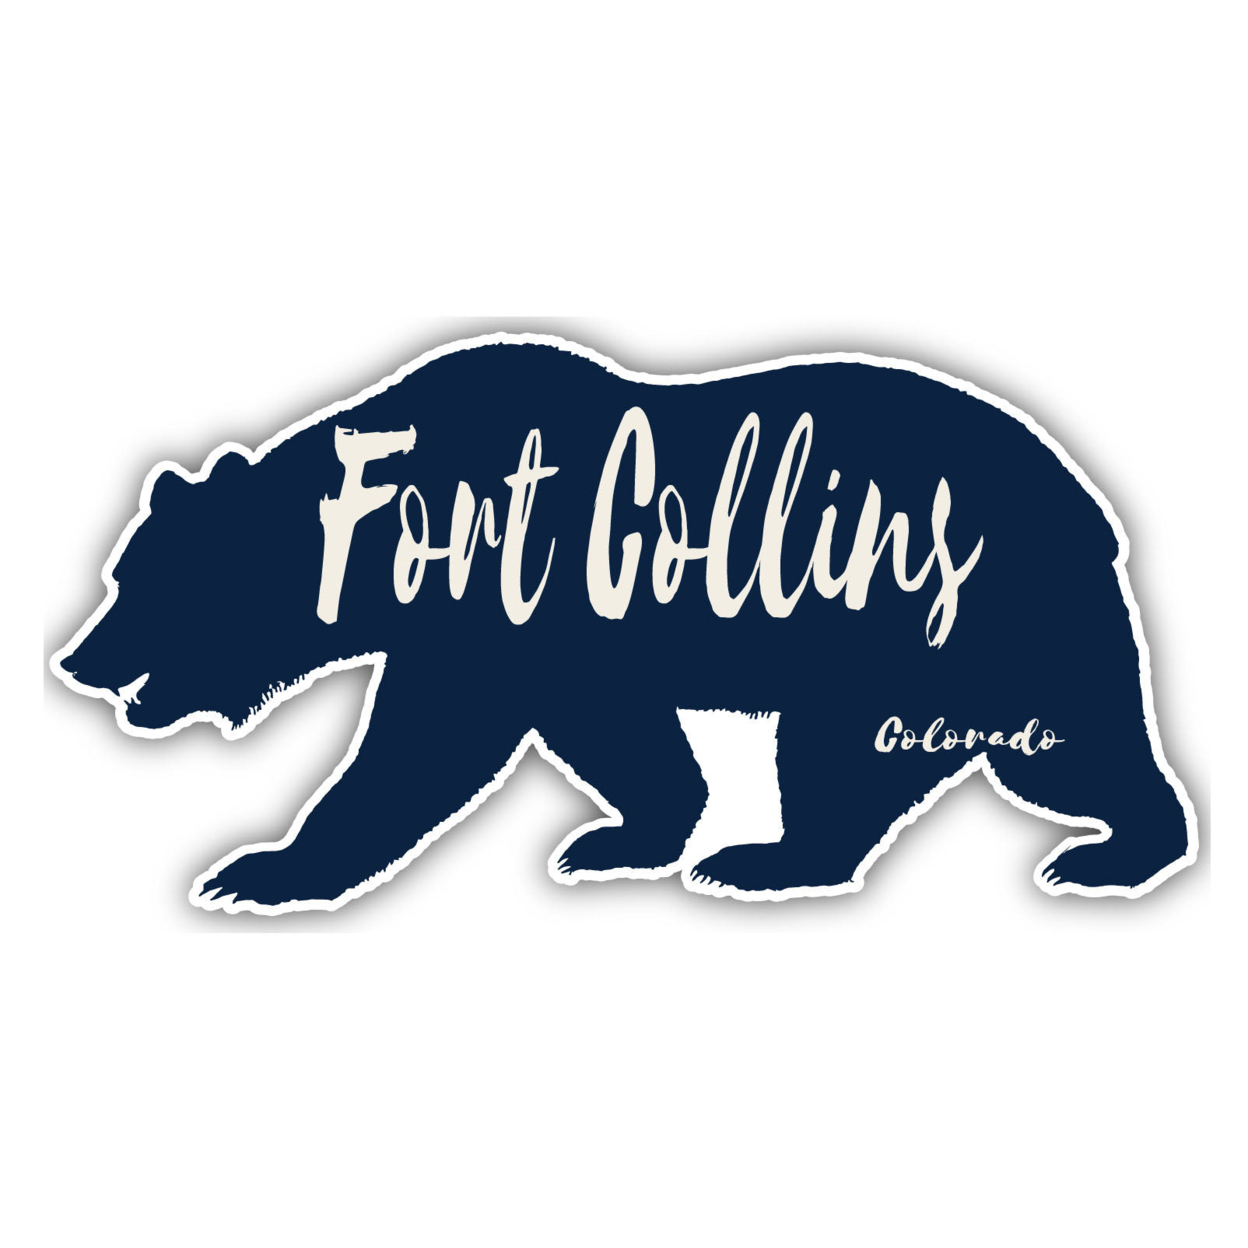 Fort Collins Colorado Souvenir Decorative Stickers (Choose Theme And Size) - Single Unit, 8-Inch, Great Outdoors